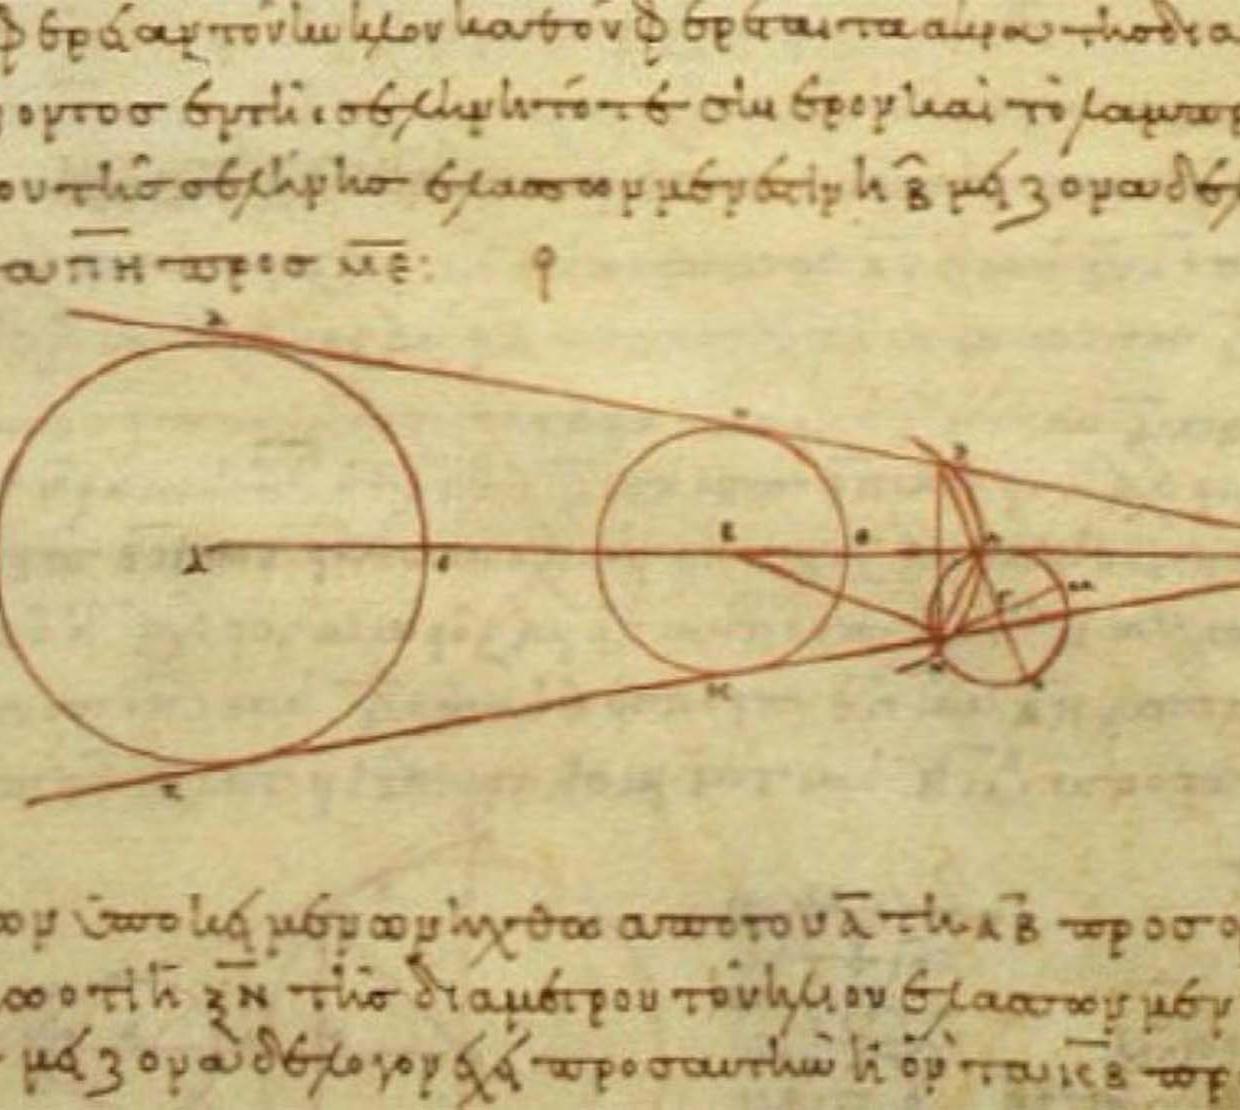 A depiction of the eclipse as drawn by Greek mathematicians.